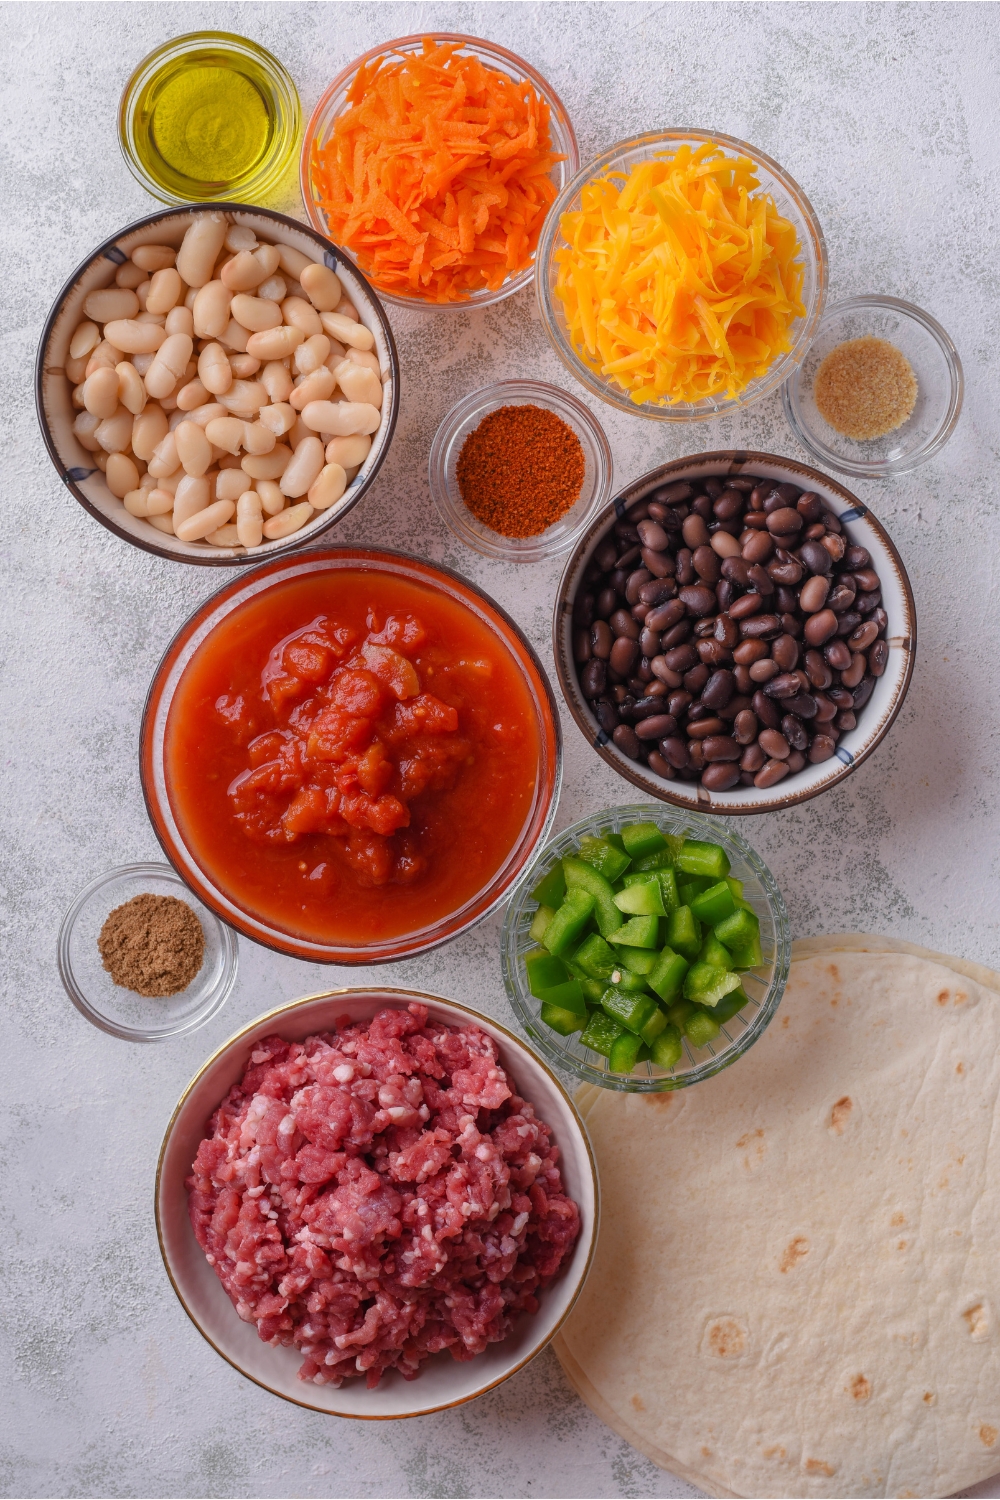 An assortment of ingredients including bowls of crushed tomatoes, black beans, white beans, grated carrots, shredded cheese, oil, spices, ground beef, and a stack of tortillas.